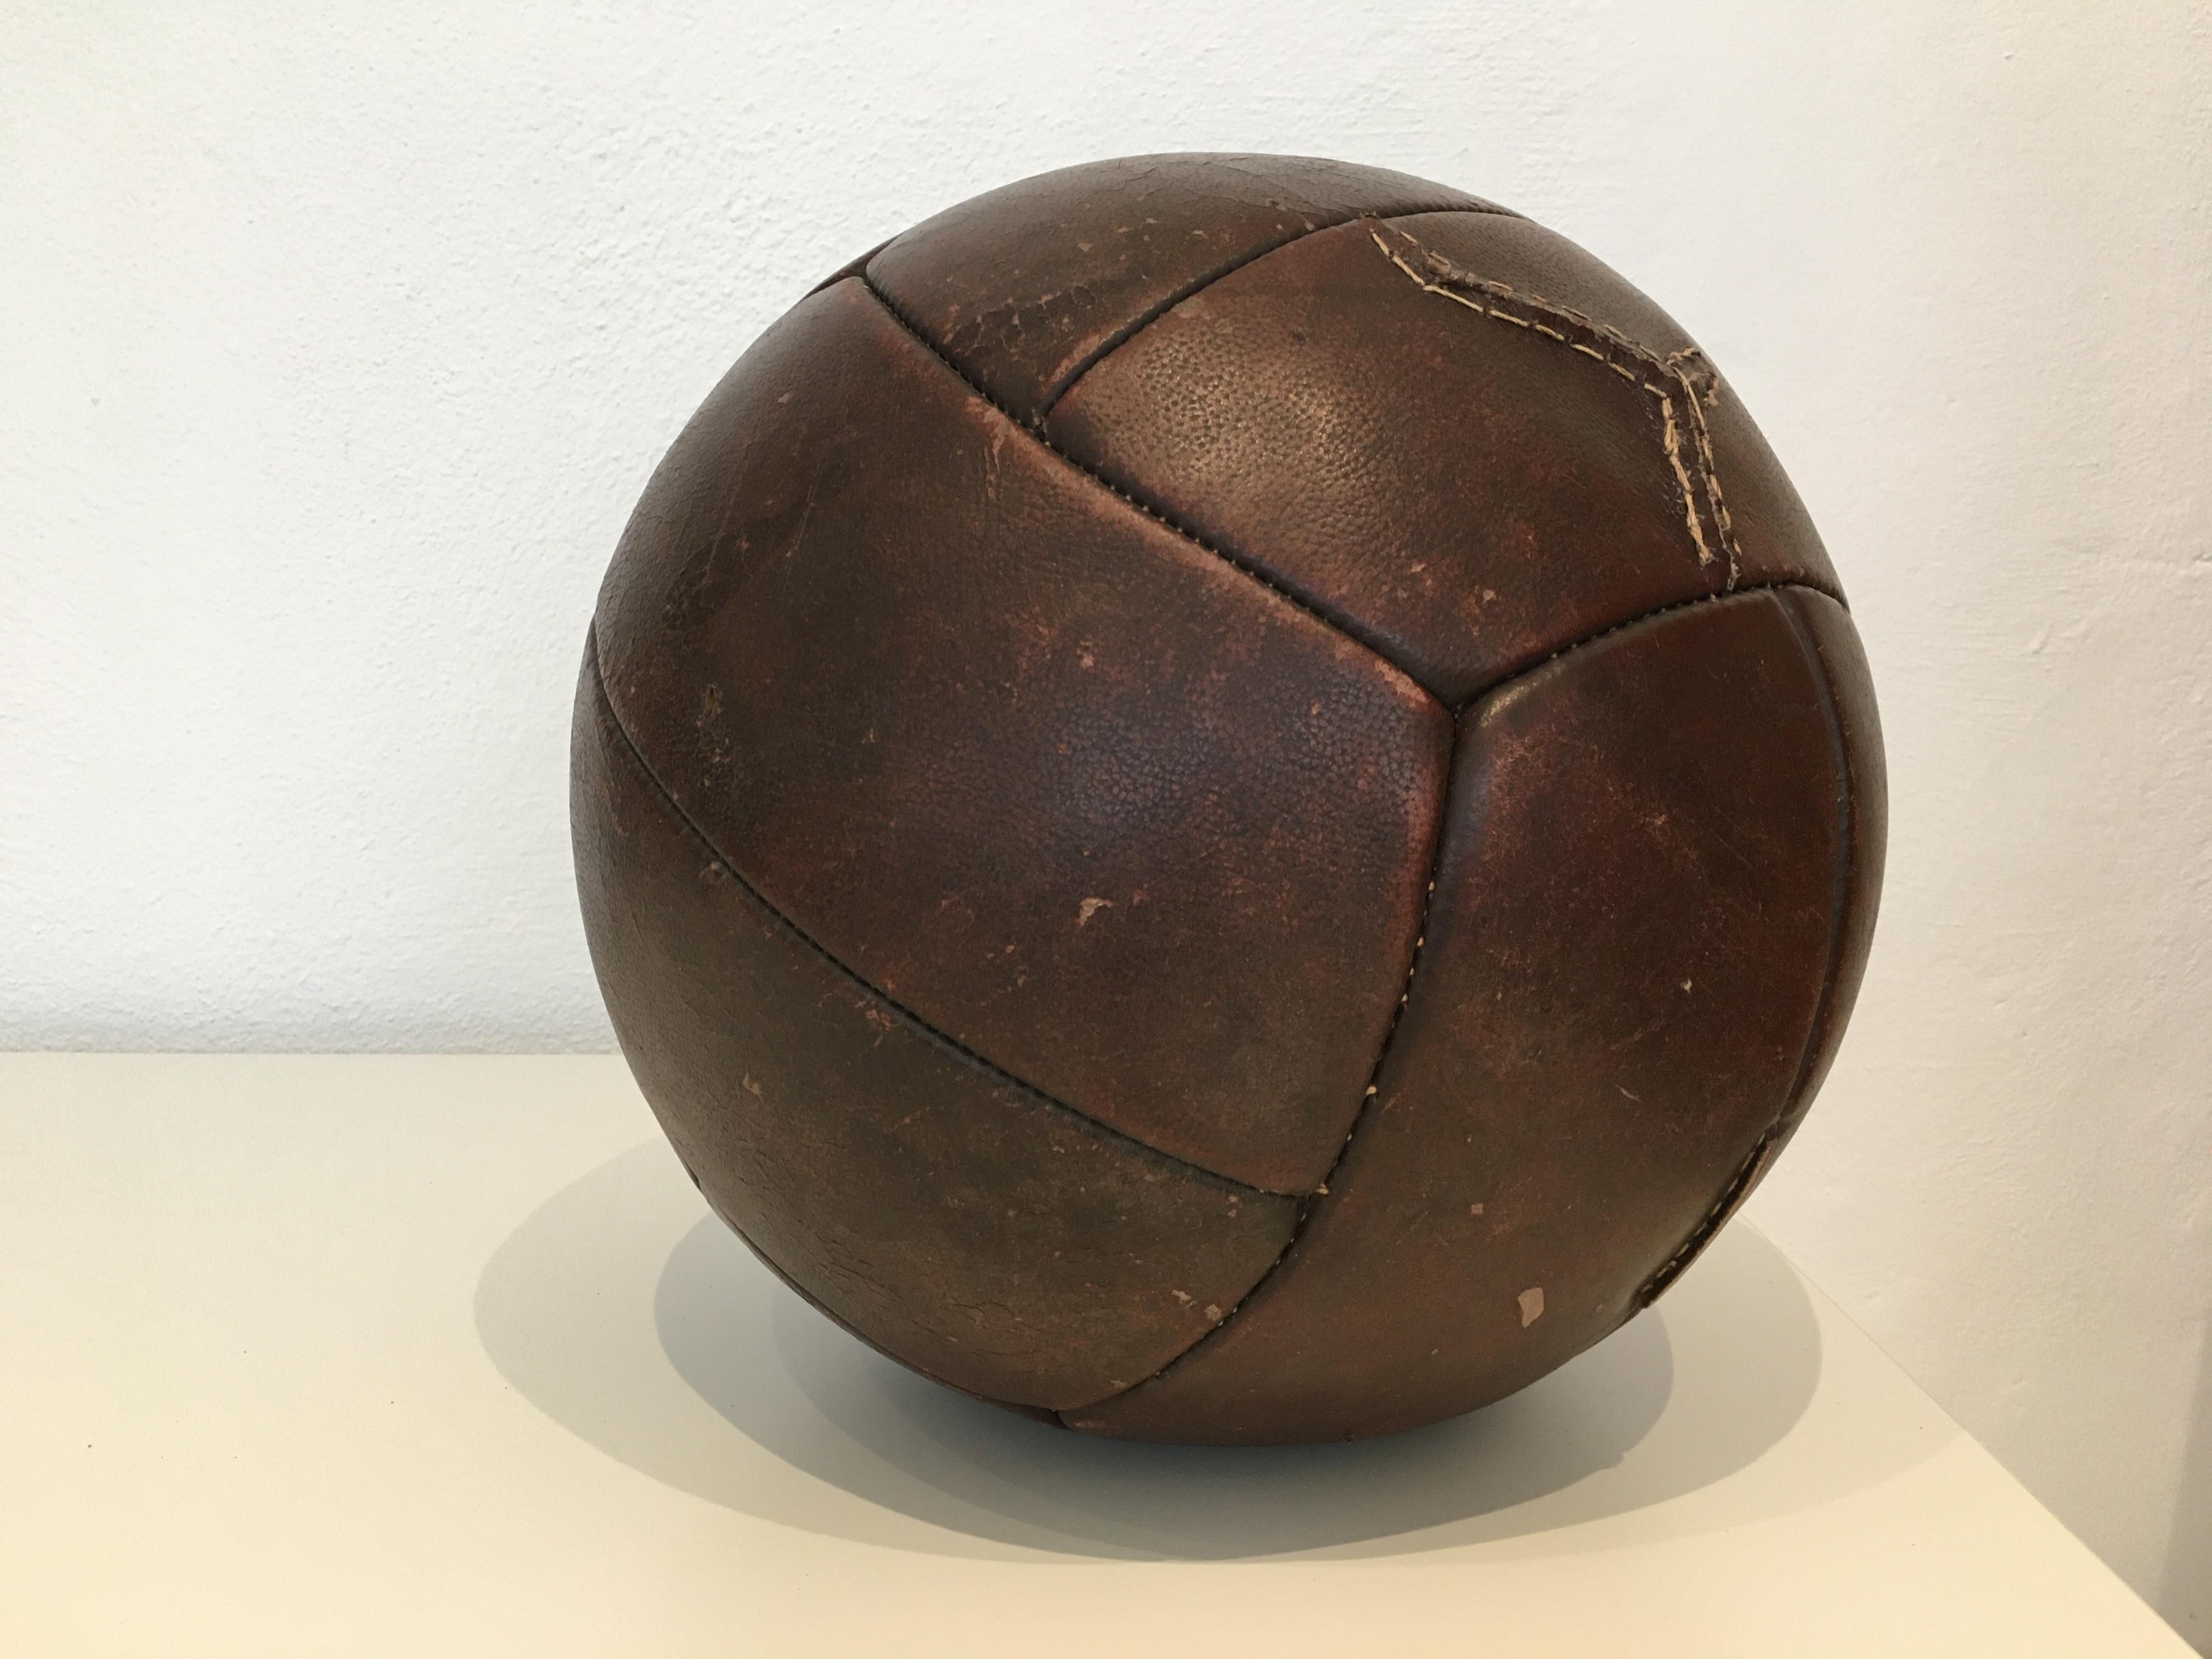 This medicine ball comes from the stock of an old Czech gymnasium. Made in the 1930s. Patina consistent with age and use. Cleaned and treated with a special leather care. Weight: 4kg. Measures: Diameter 11.81 inch.